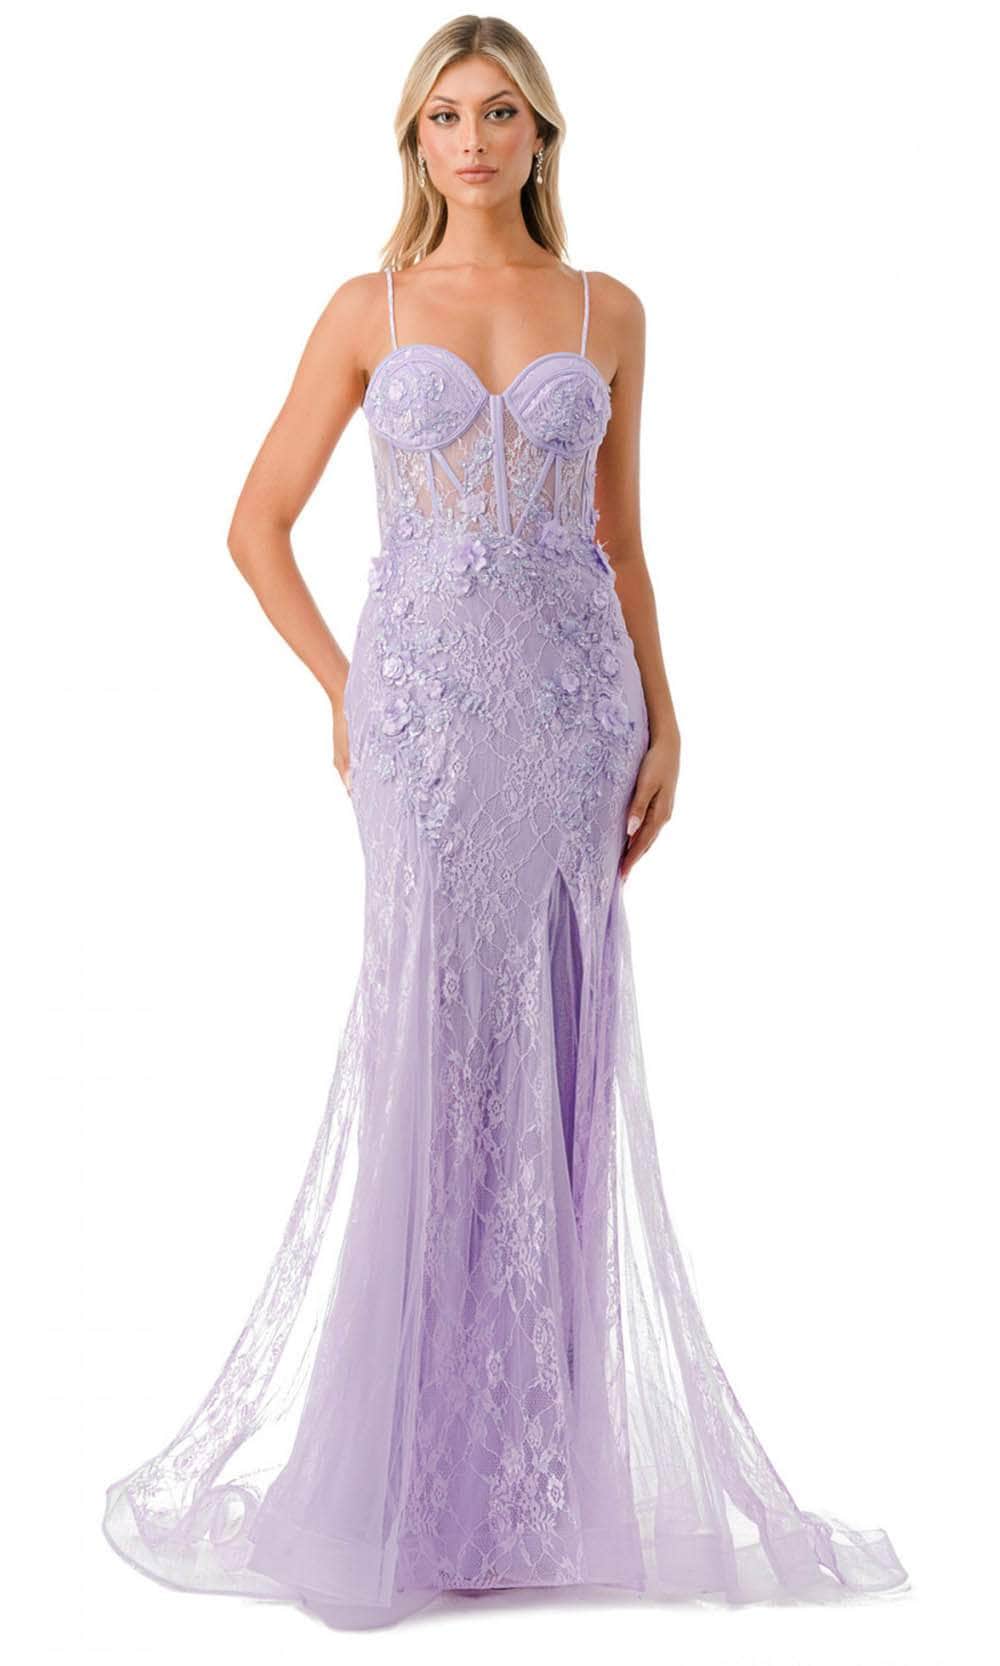 Aspeed Design P2120 - Bustier Bodice Prom Gown XS / Lilac